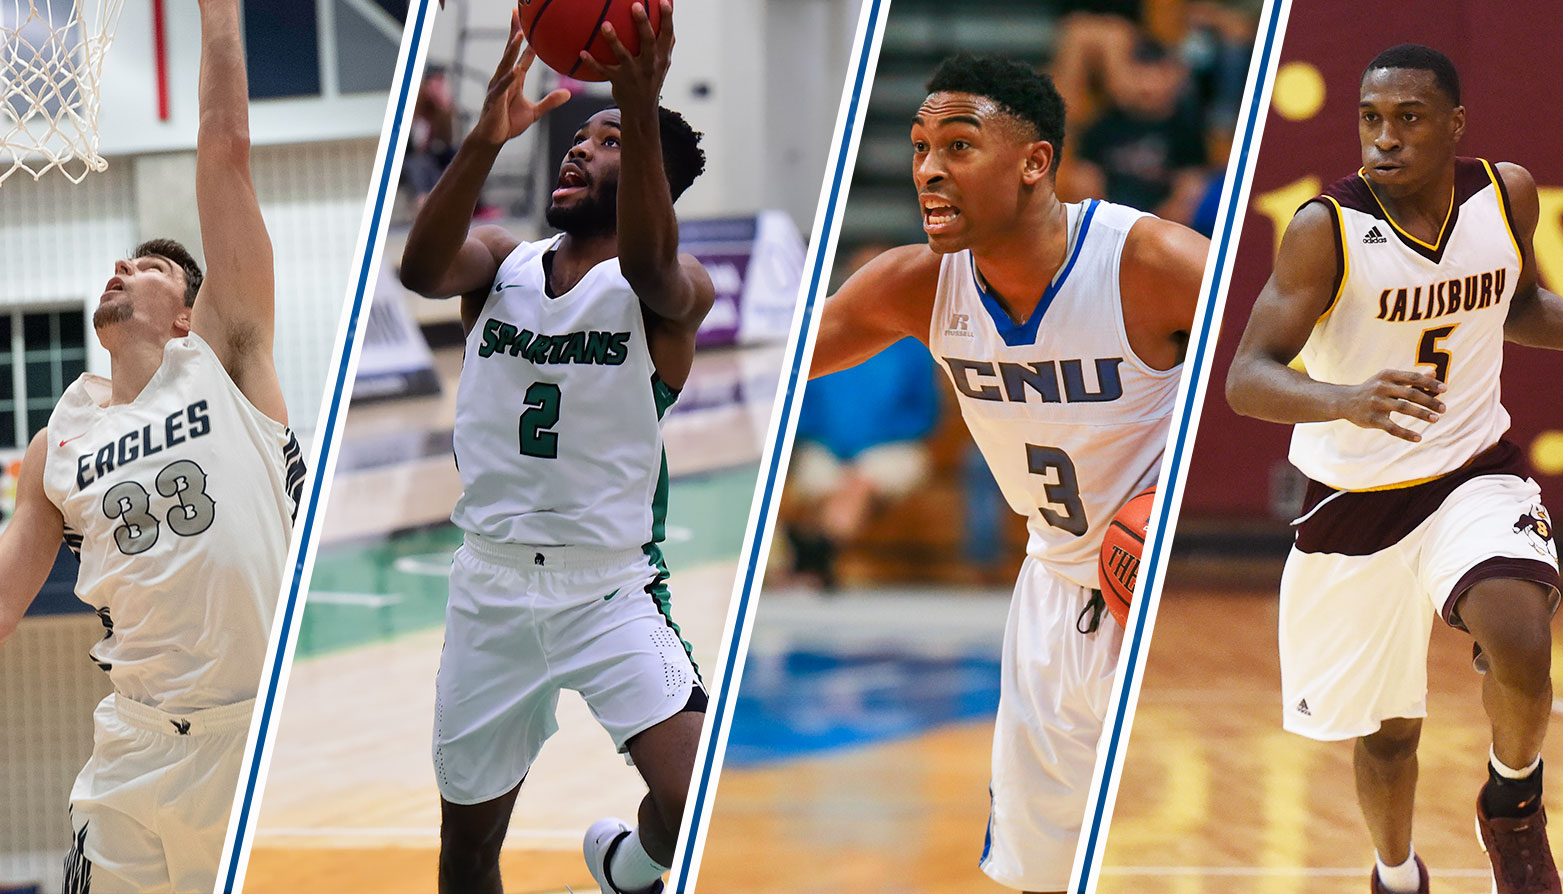 Home Teams Prevail, Earn Spots in CAC Men's Basketball Semifinals